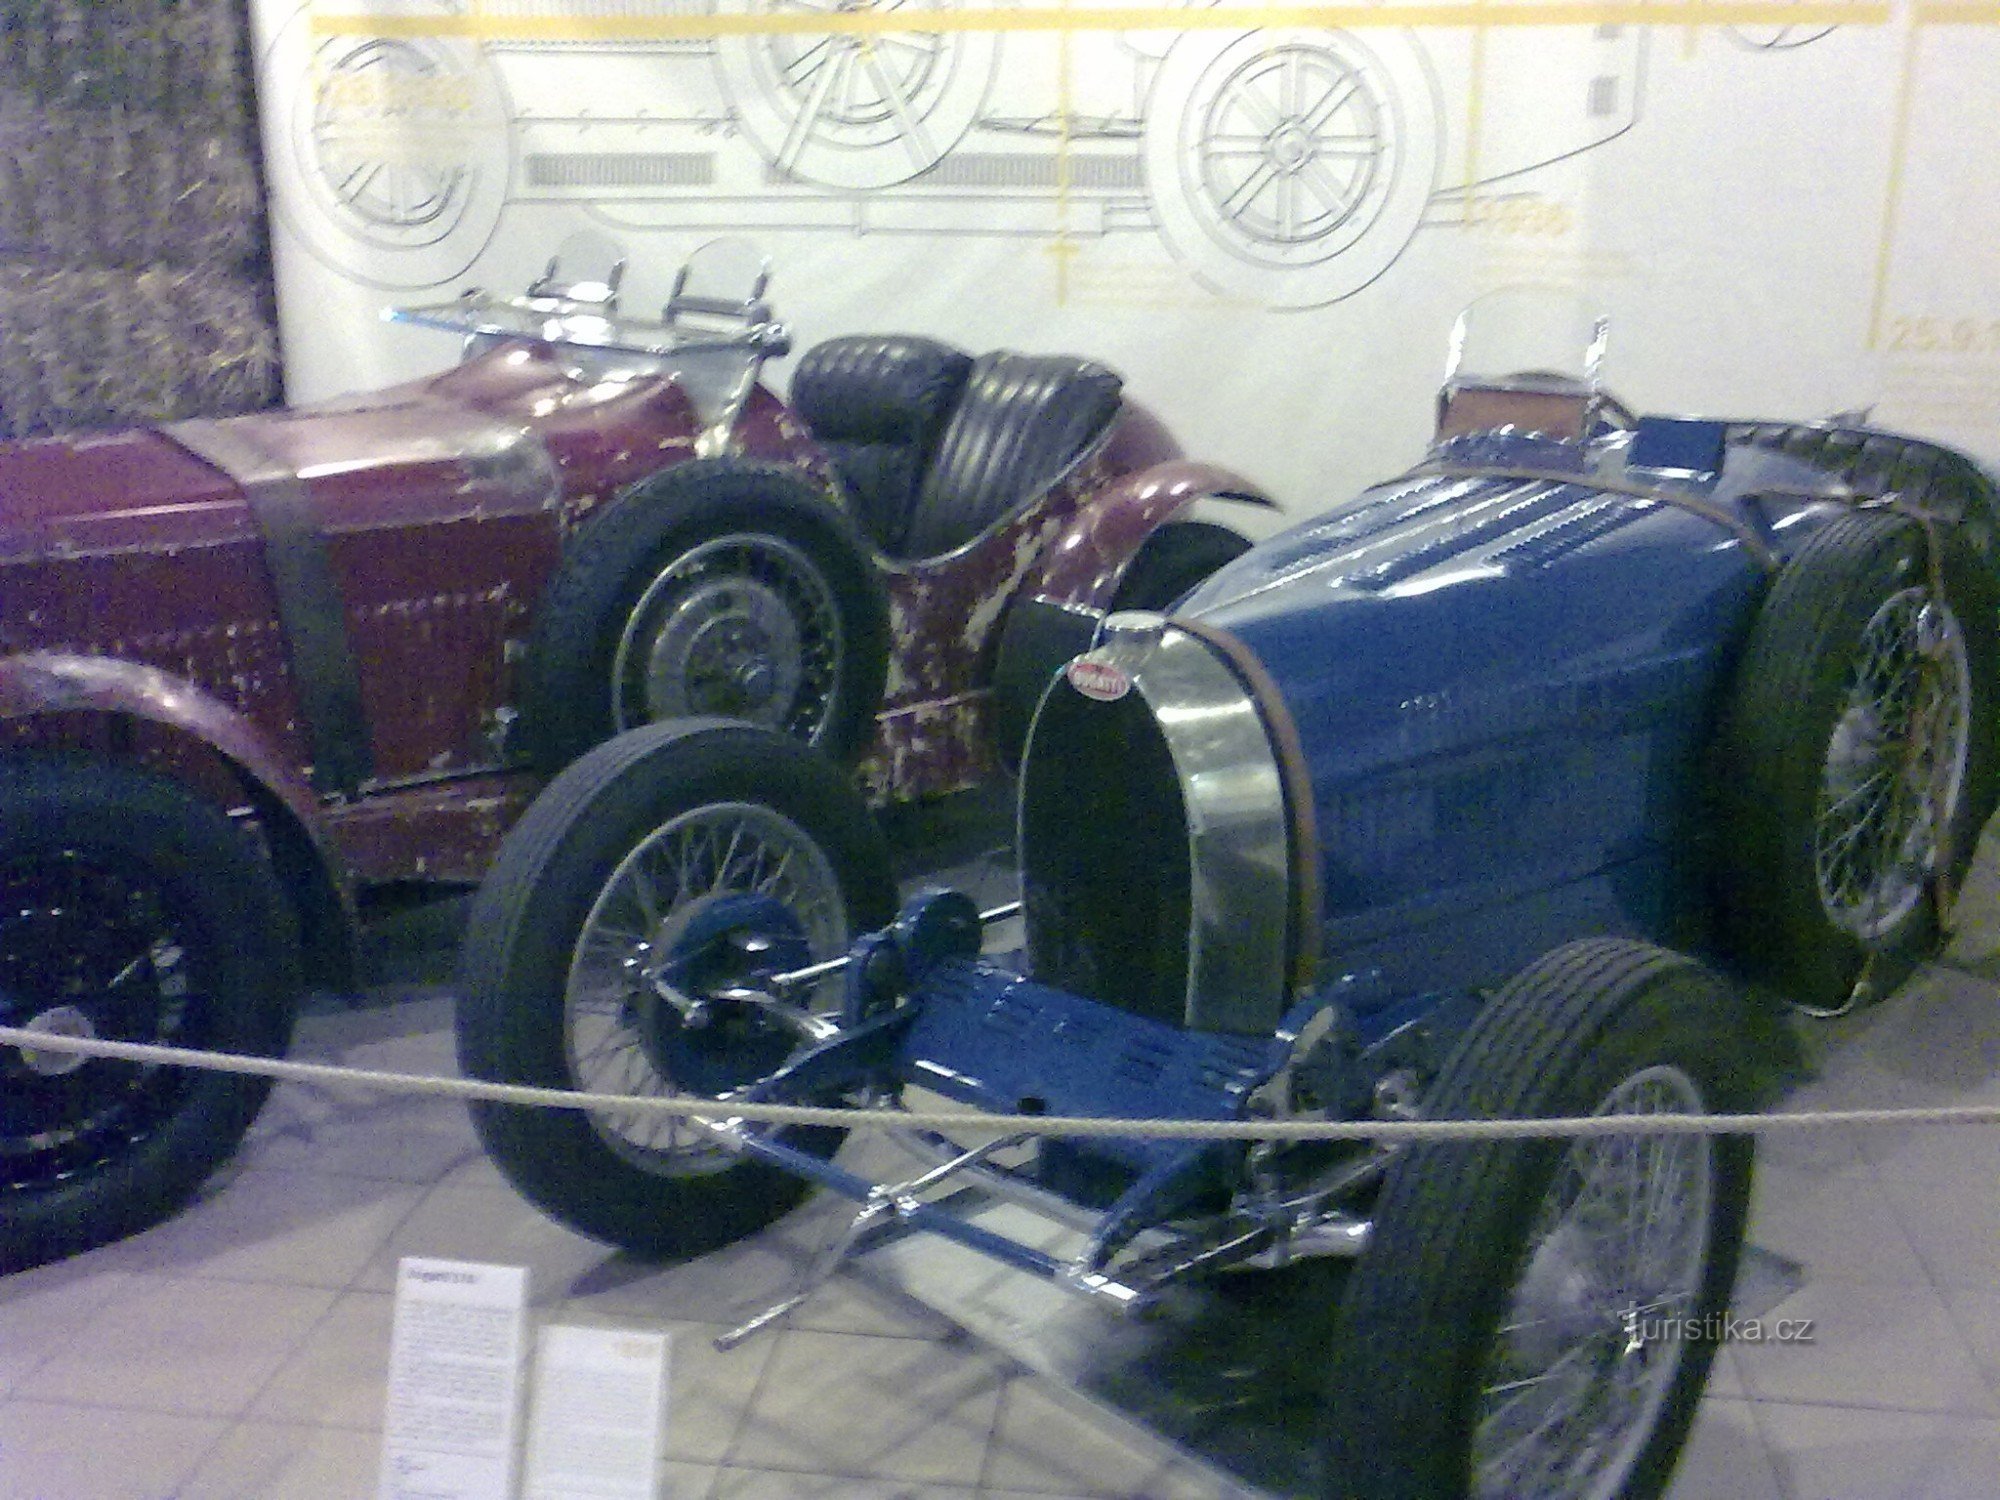 Technical Museum in Brno